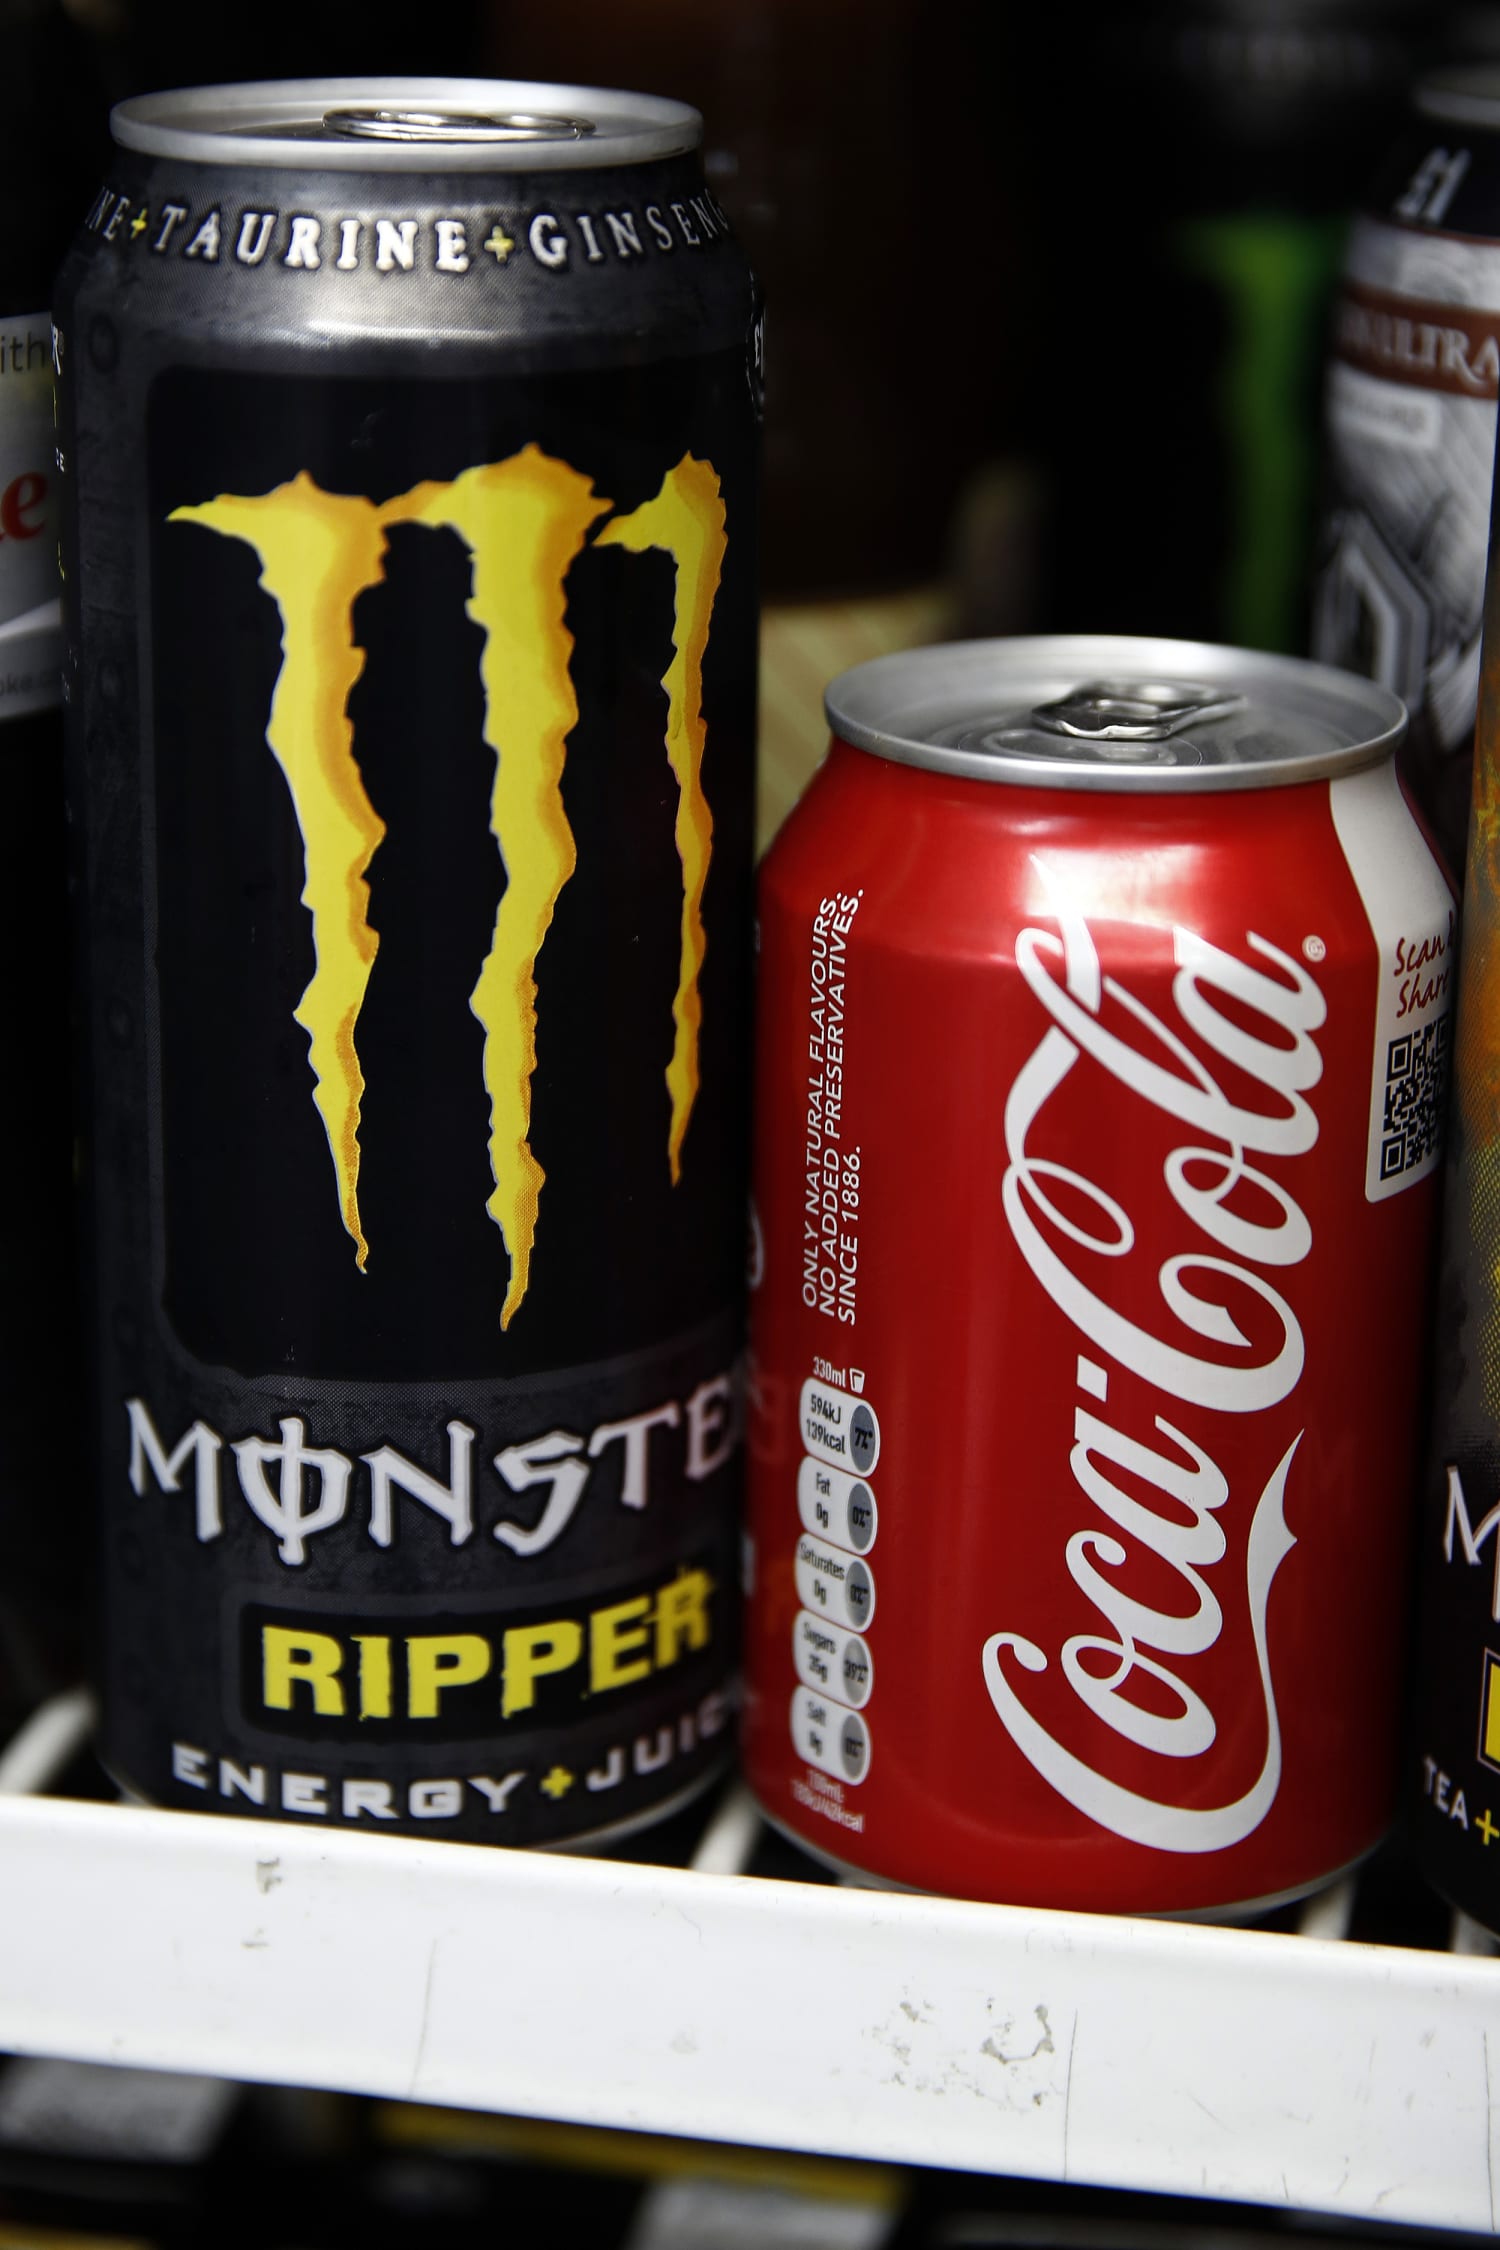 Coca-Cola is launching an energy drink in the U.S.